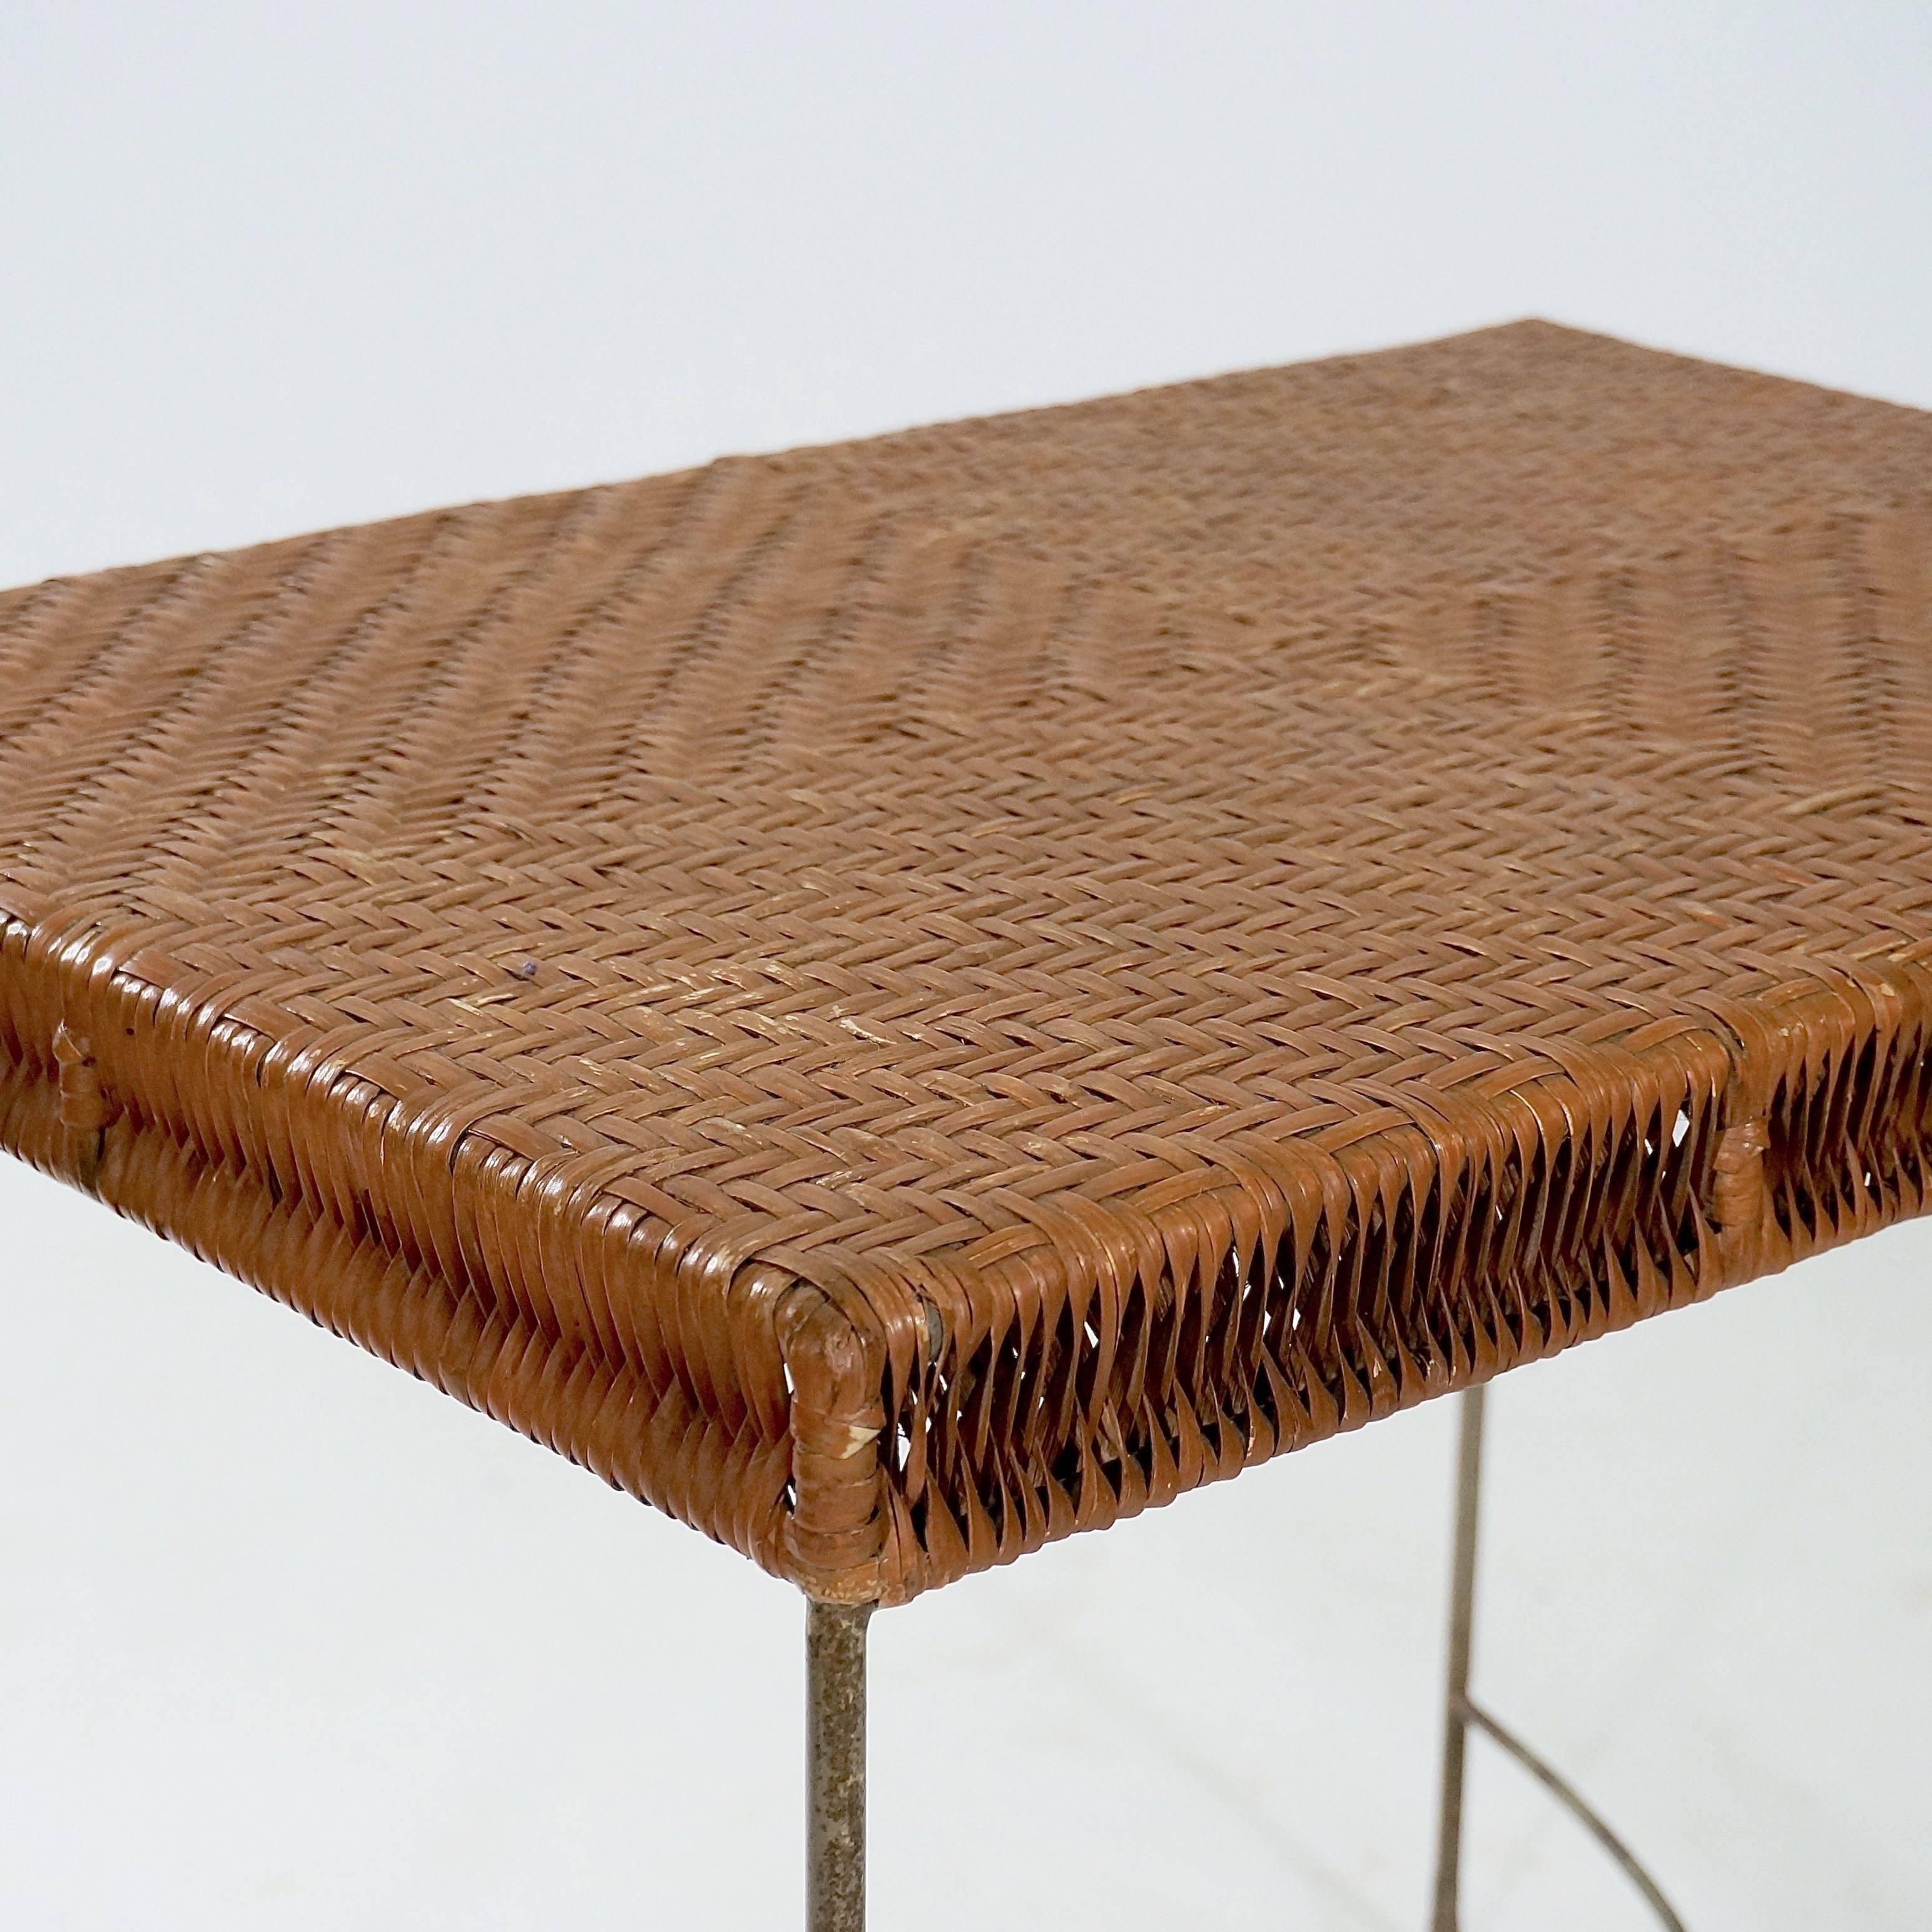 The simple metal under-structure with rib turned feet and interlaced stretcher supporting a rattan top.

France, circa 1950s.